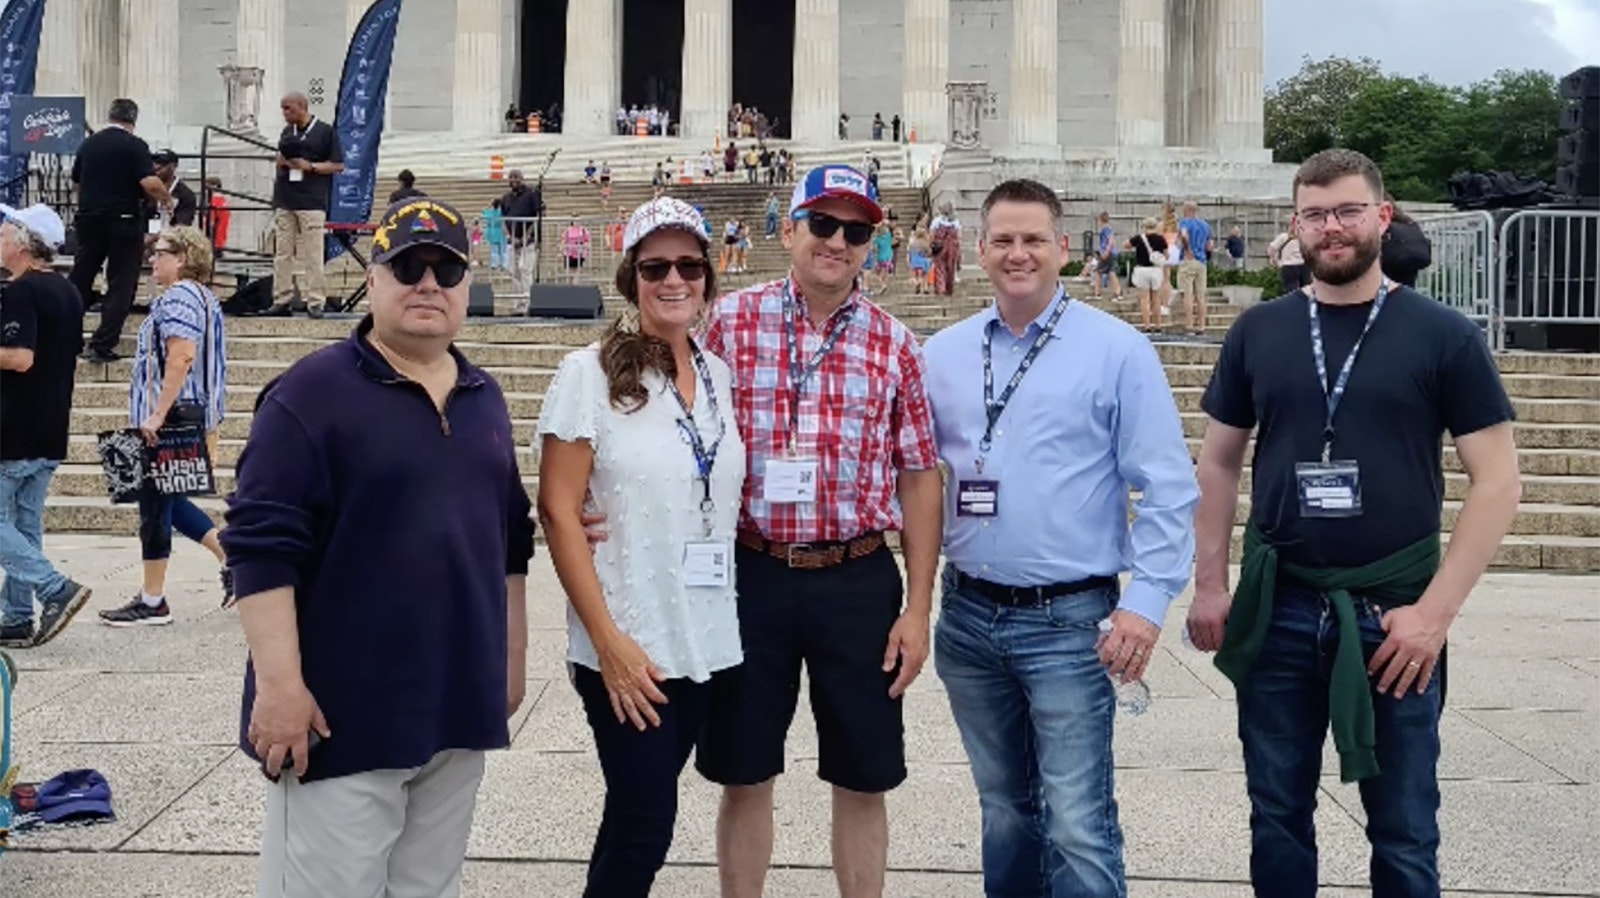 Wyoming Republicans, from left, Tim Salazar, Sarah Penn, Nate Penn, Bo Bateman and Ocean Andrew were in Washington, D.C., on Saturday to mark the one-year anniversary of the decision to overturn Roe v. Wade.